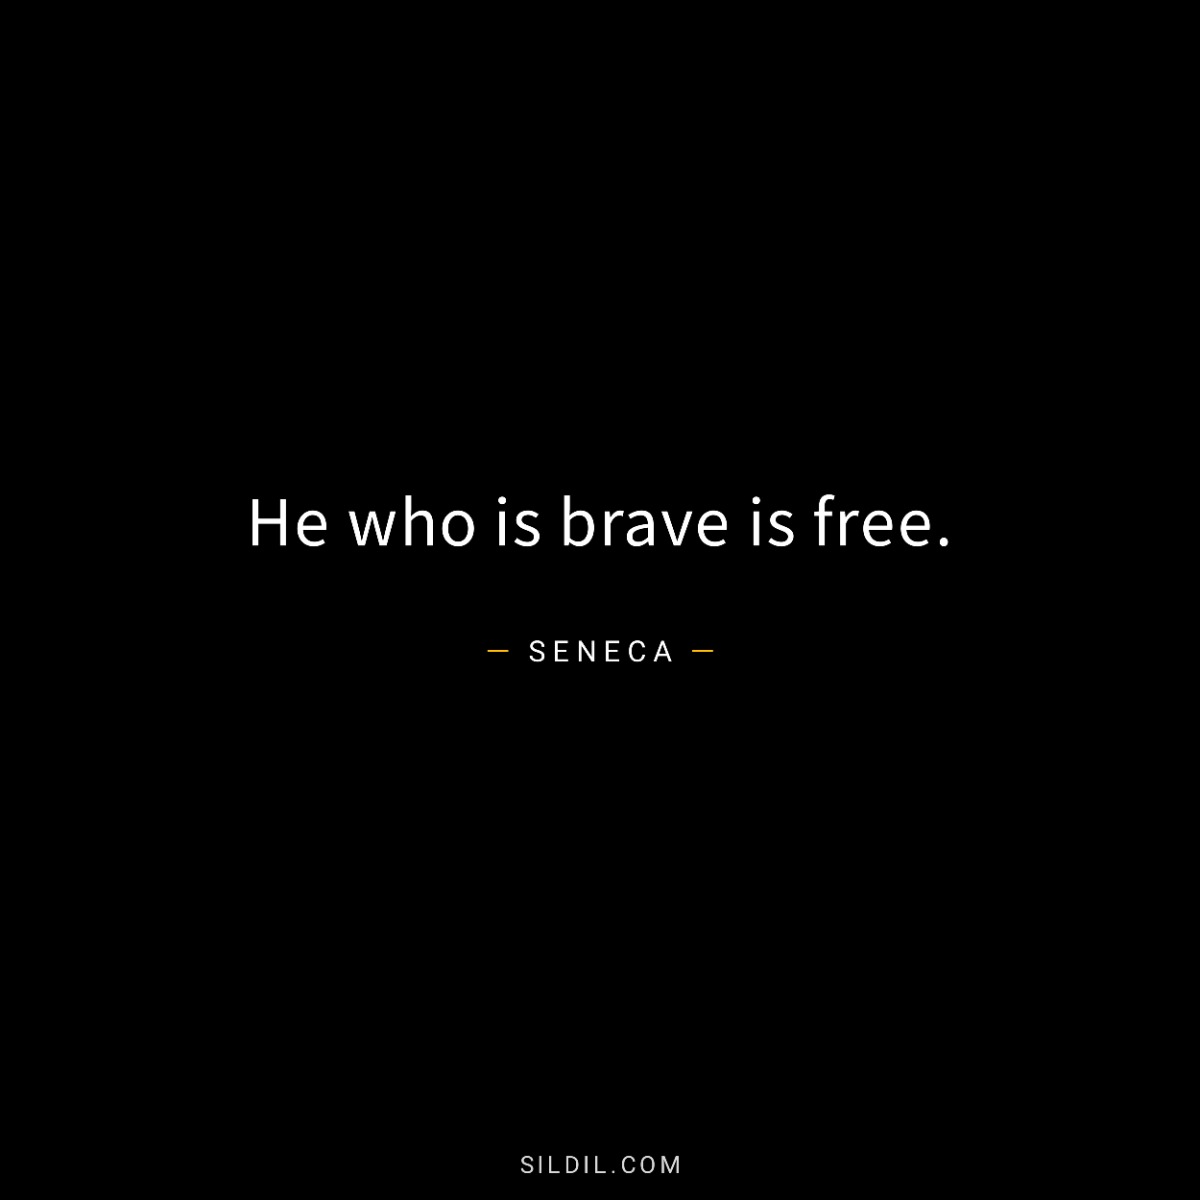 He who is brave is free.